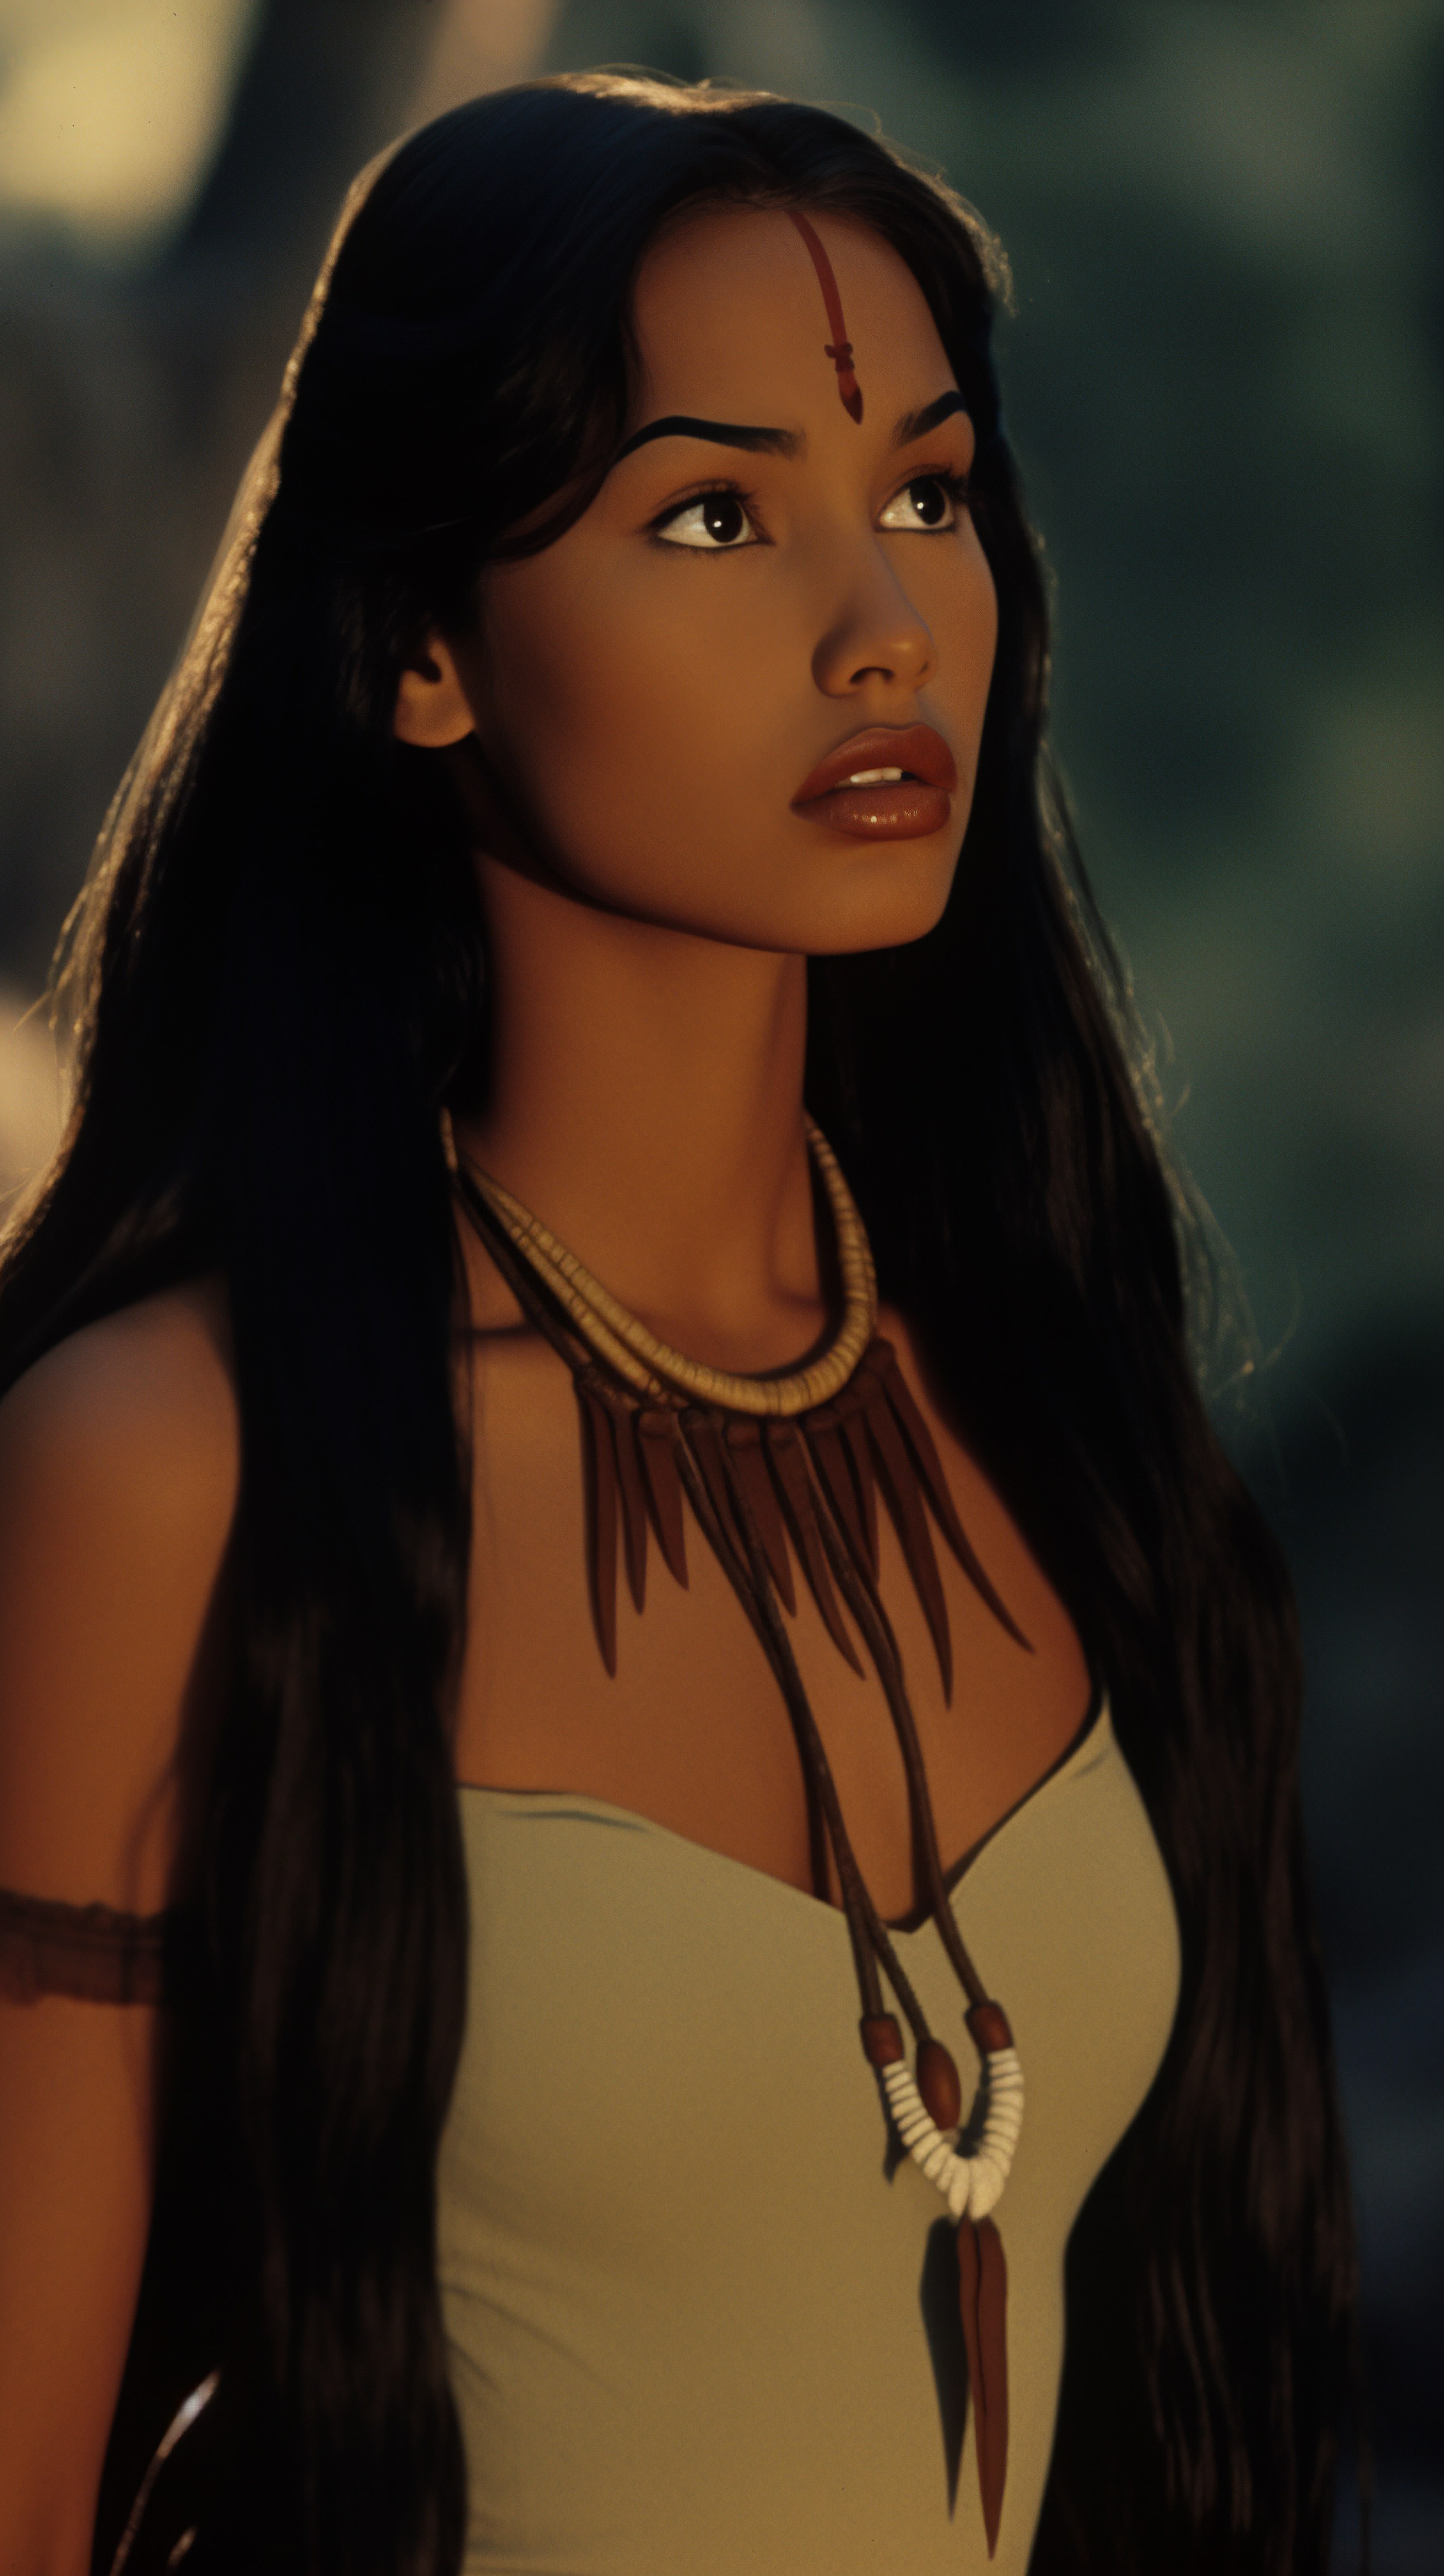 the real pocahontas in real life